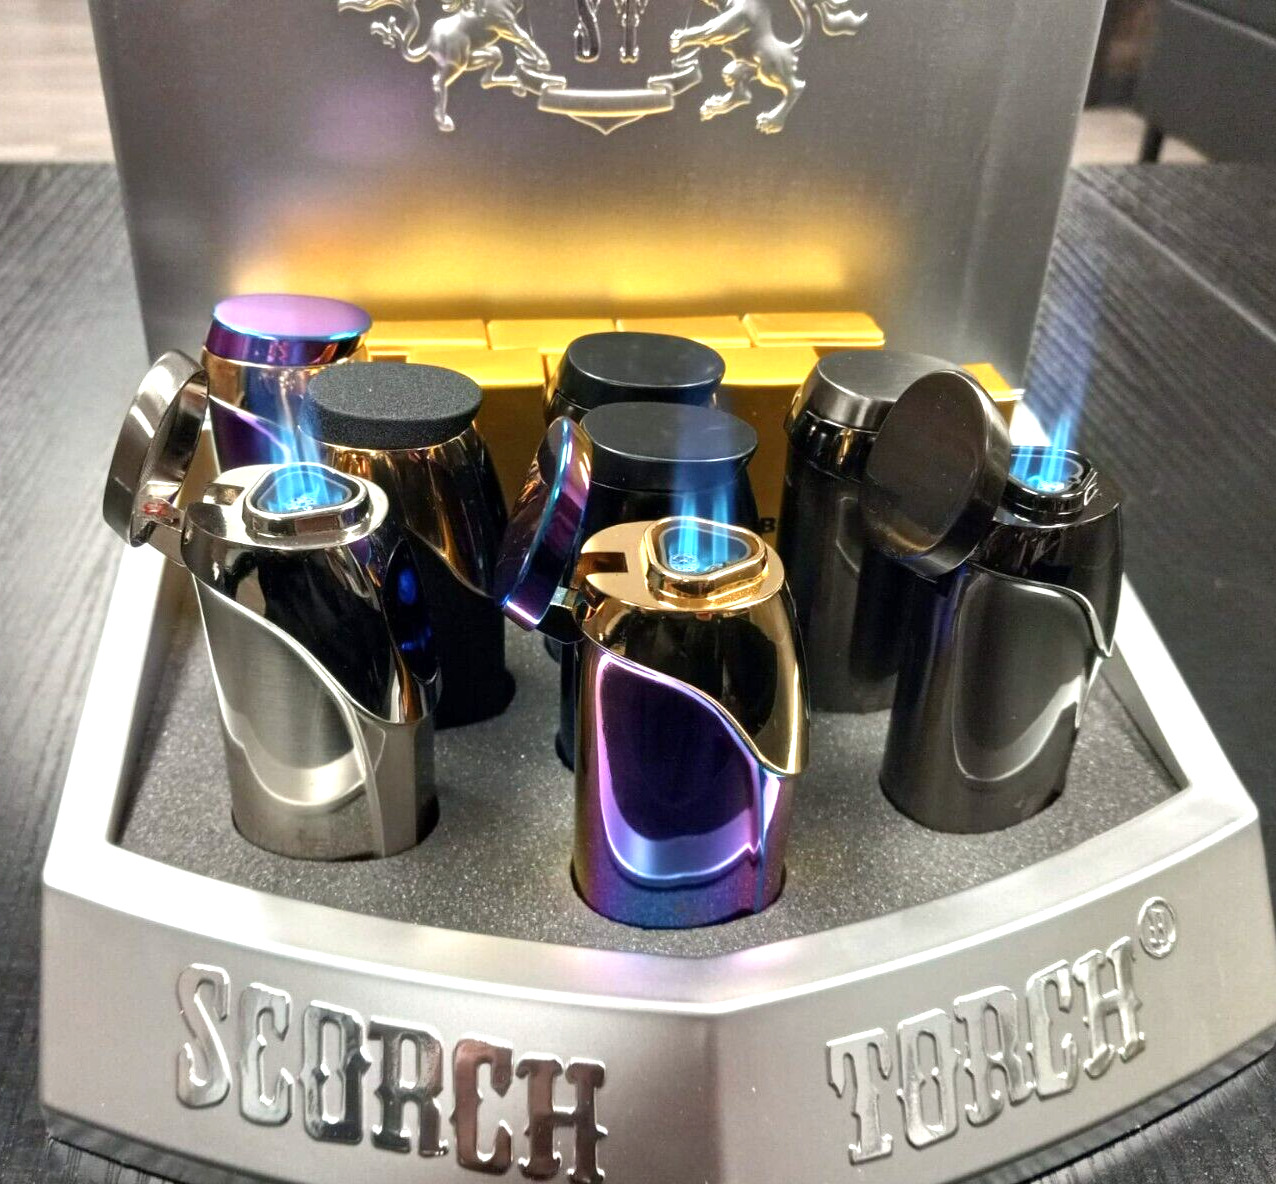 😎RECHARGEABLE SCORCH PREMIUM ADJUSTABLE SIZE 3.5”+USB CHARGER🔥IGNITES BY TOUCH